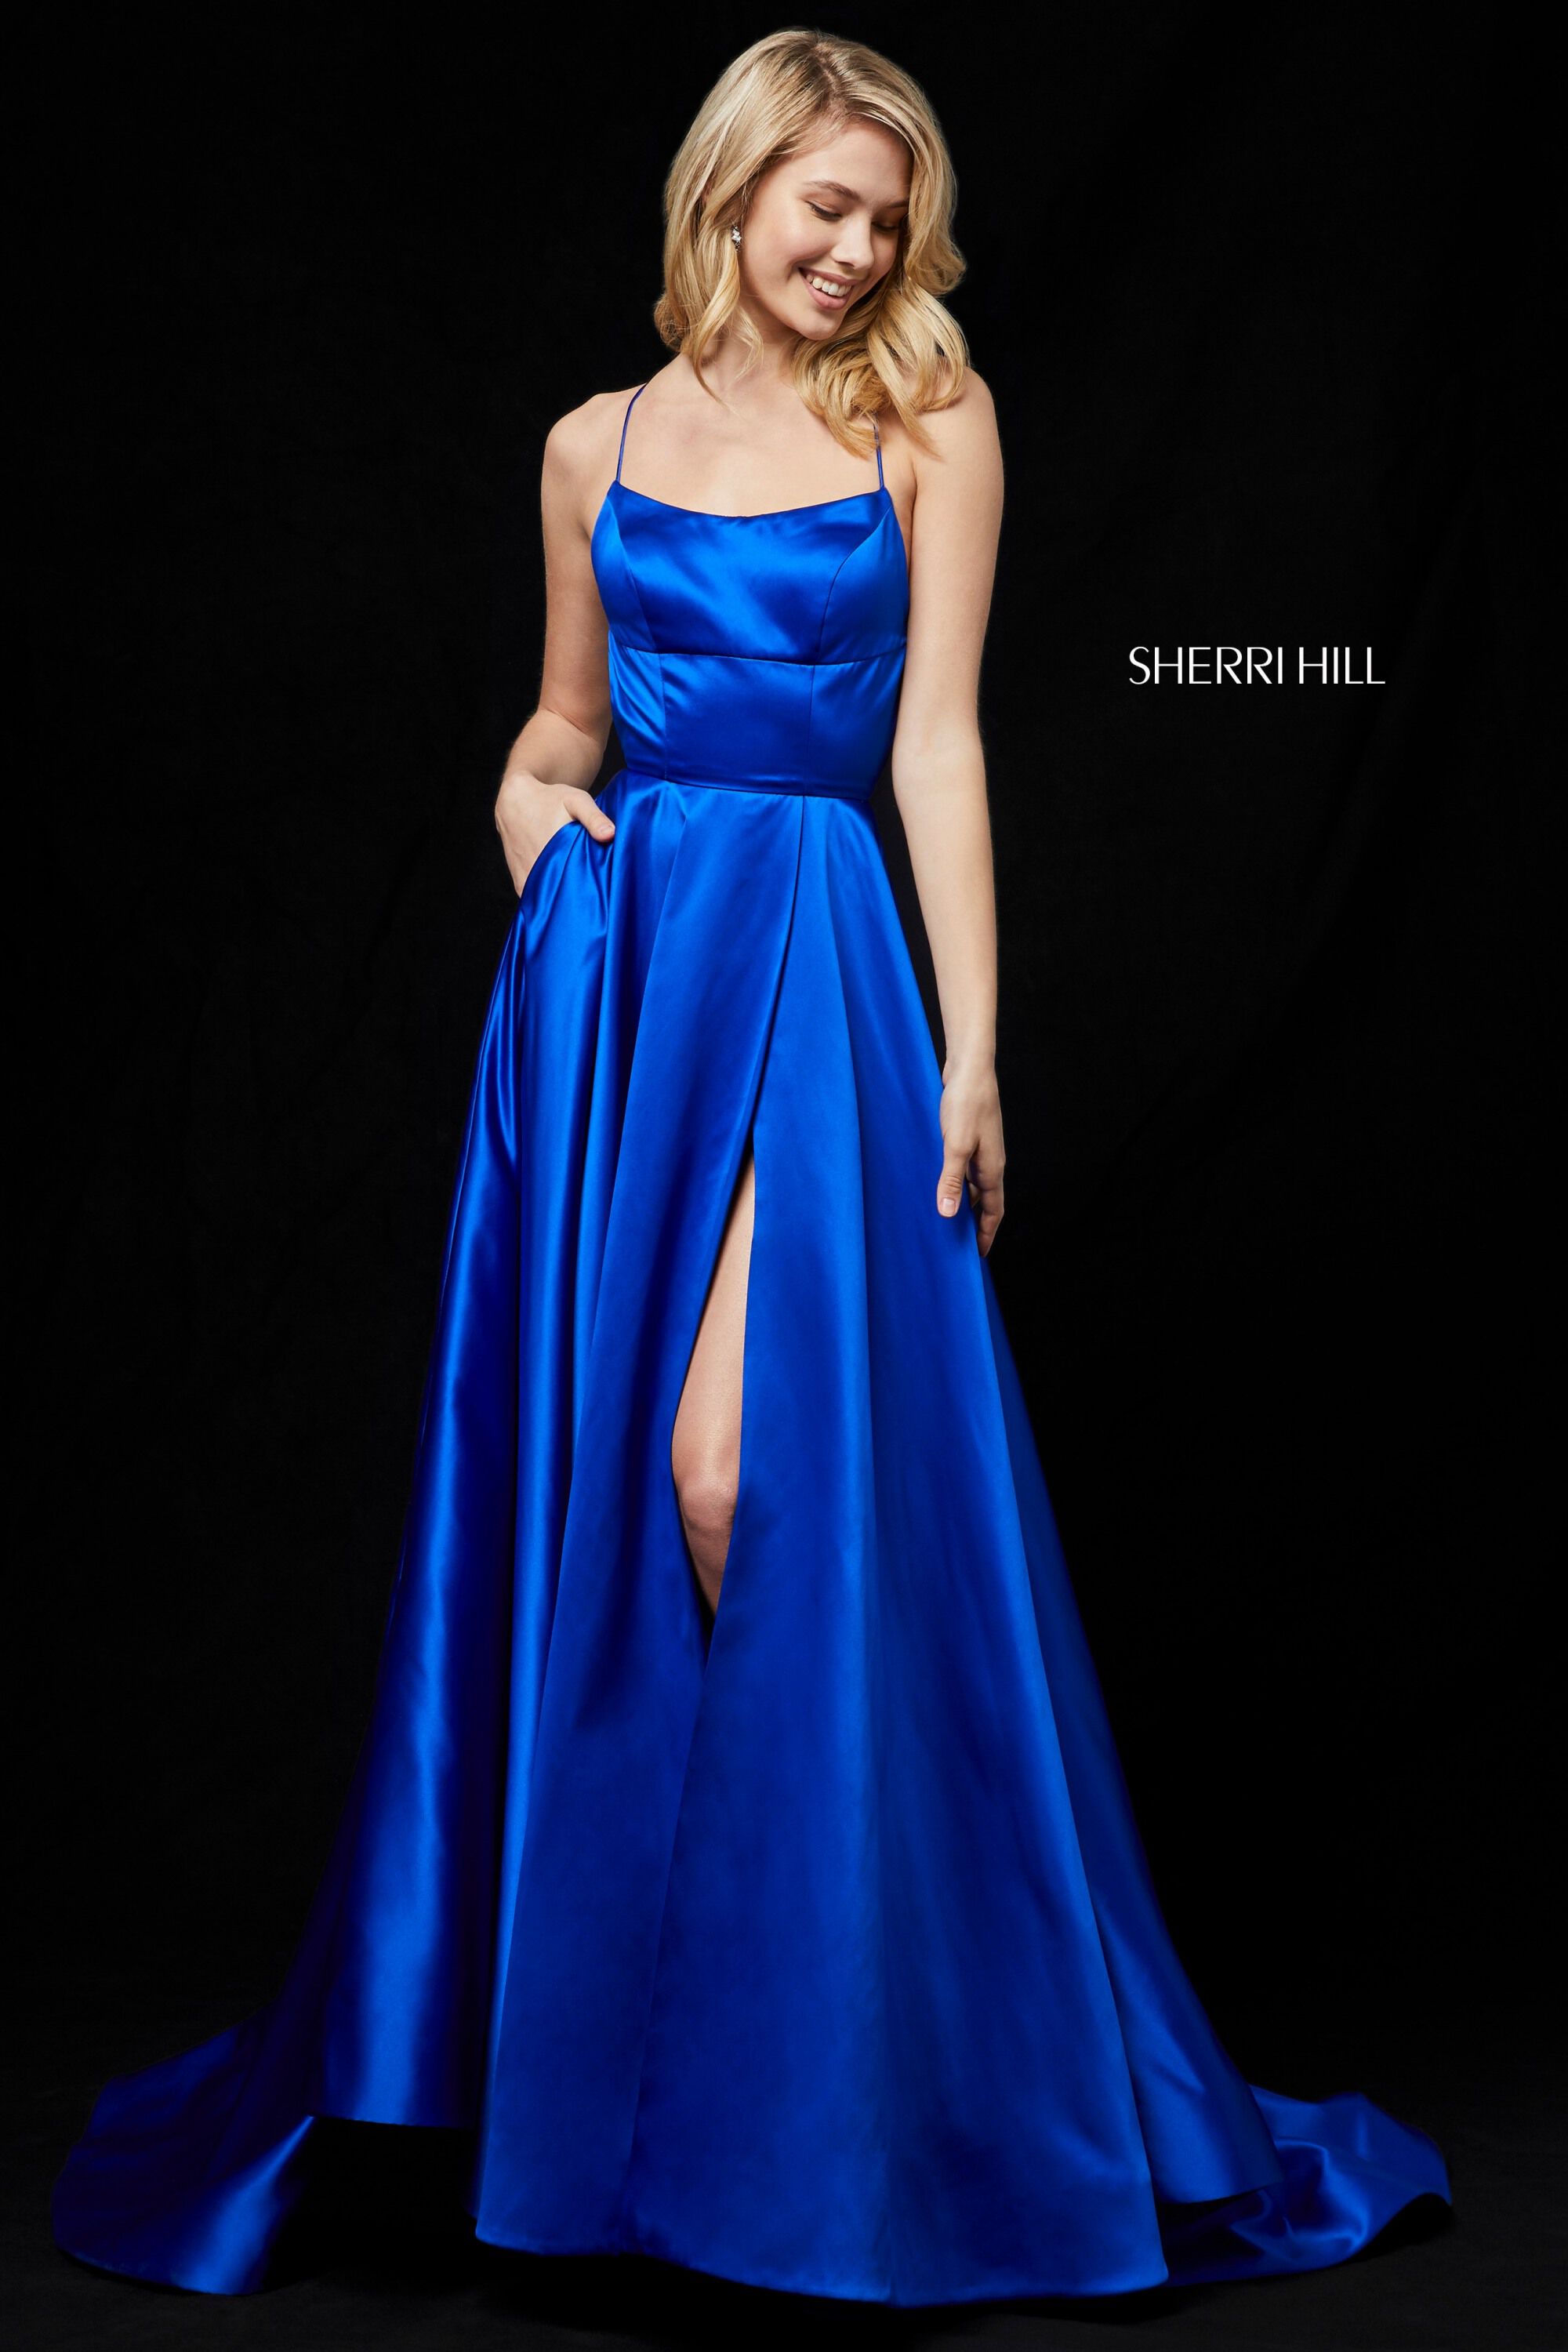 style № 52095 designed by SherriHill